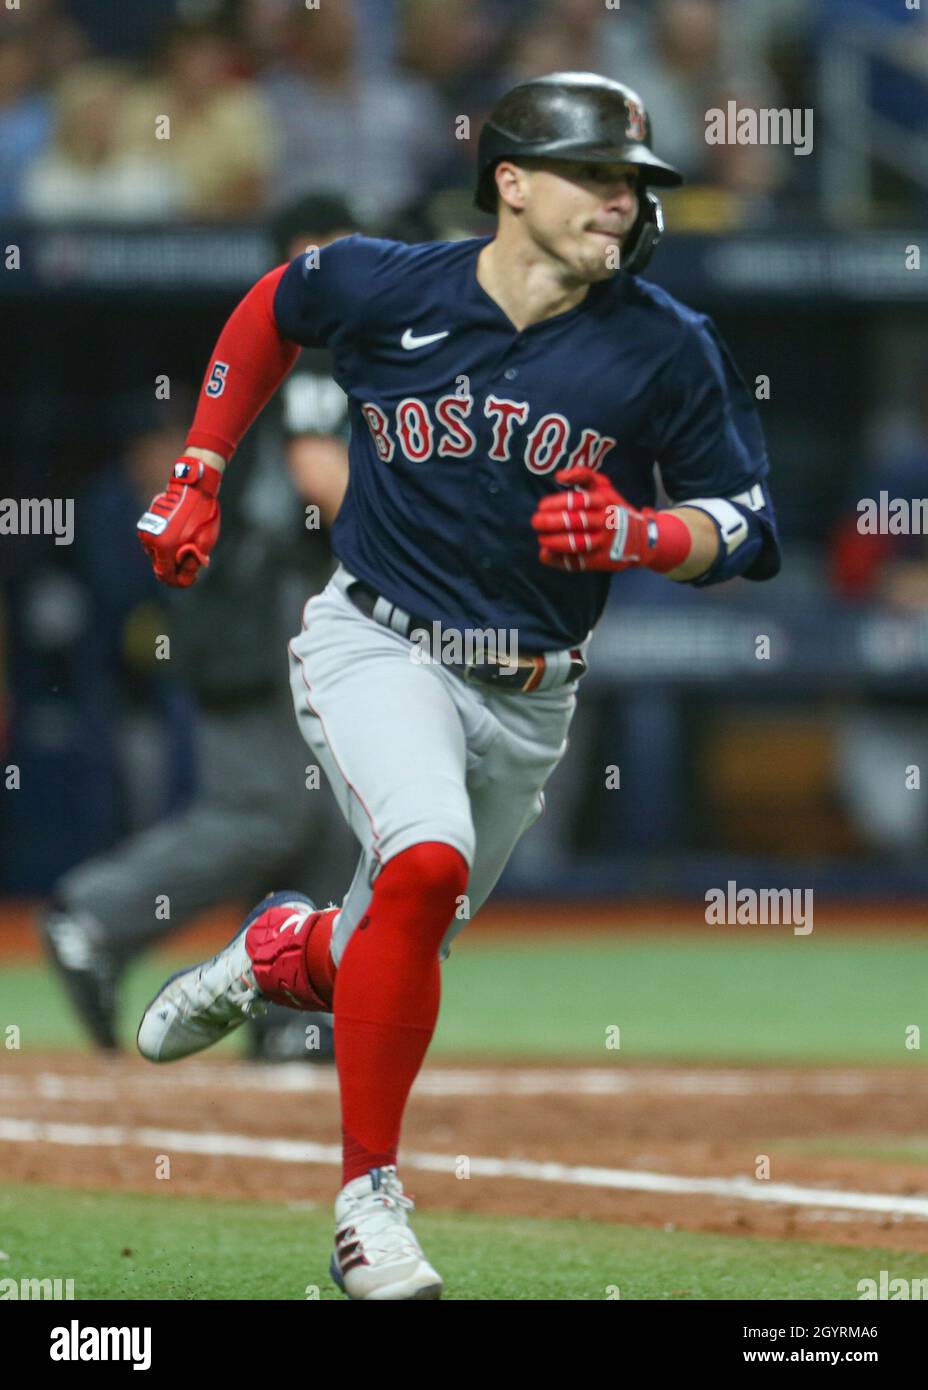 St Petersburg Fl Usa Boston Red Sox Center Fielder Enrique Hernandez 5 Hits A Double During The Alds Game 2 Against The Tampa Bay Raysat Tropicana Field Friday October 8 21 The